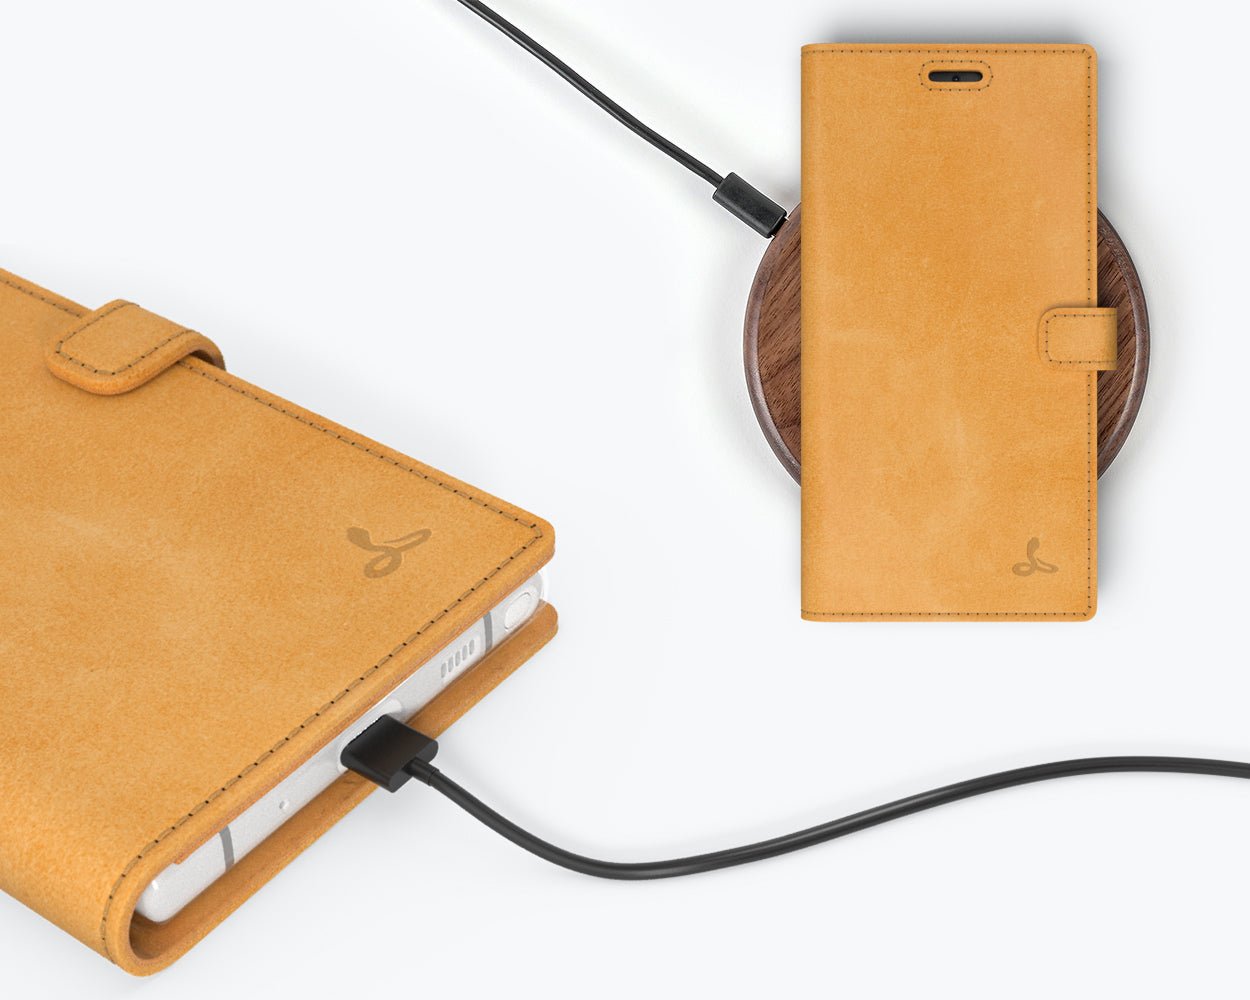 Samsung Galaxy Note 10 Plus - Vintage Leather Wallet (Almost Perfect) Honey Gold Samsung Galaxy Note 10 Plus - Snakehive UK